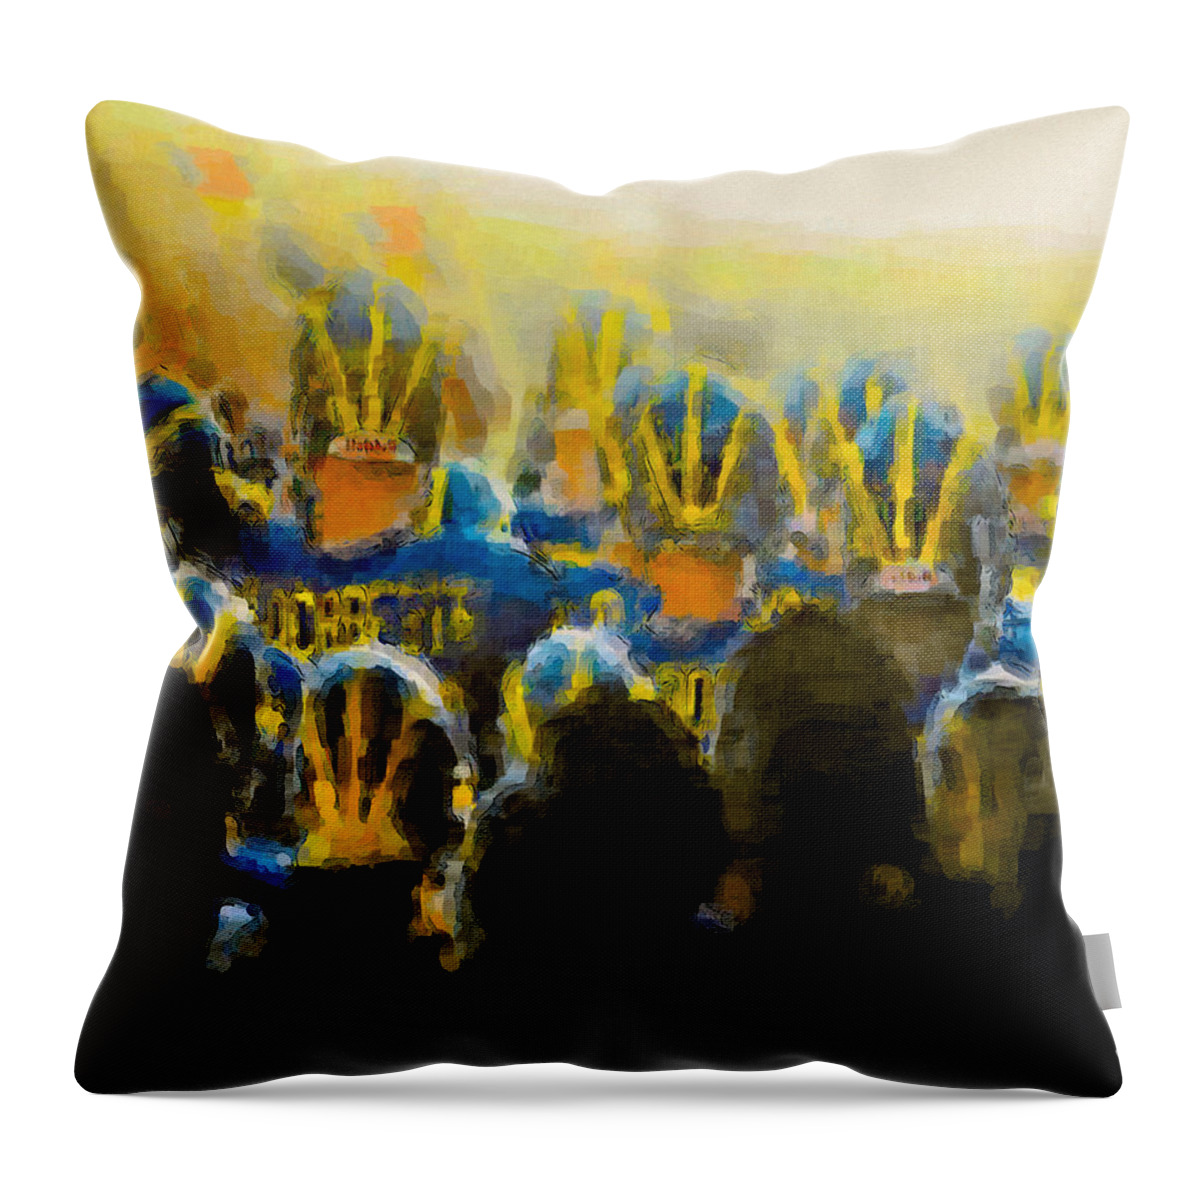 University Of Michigan Throw Pillow featuring the painting Tunnel Fever Special by John Farr